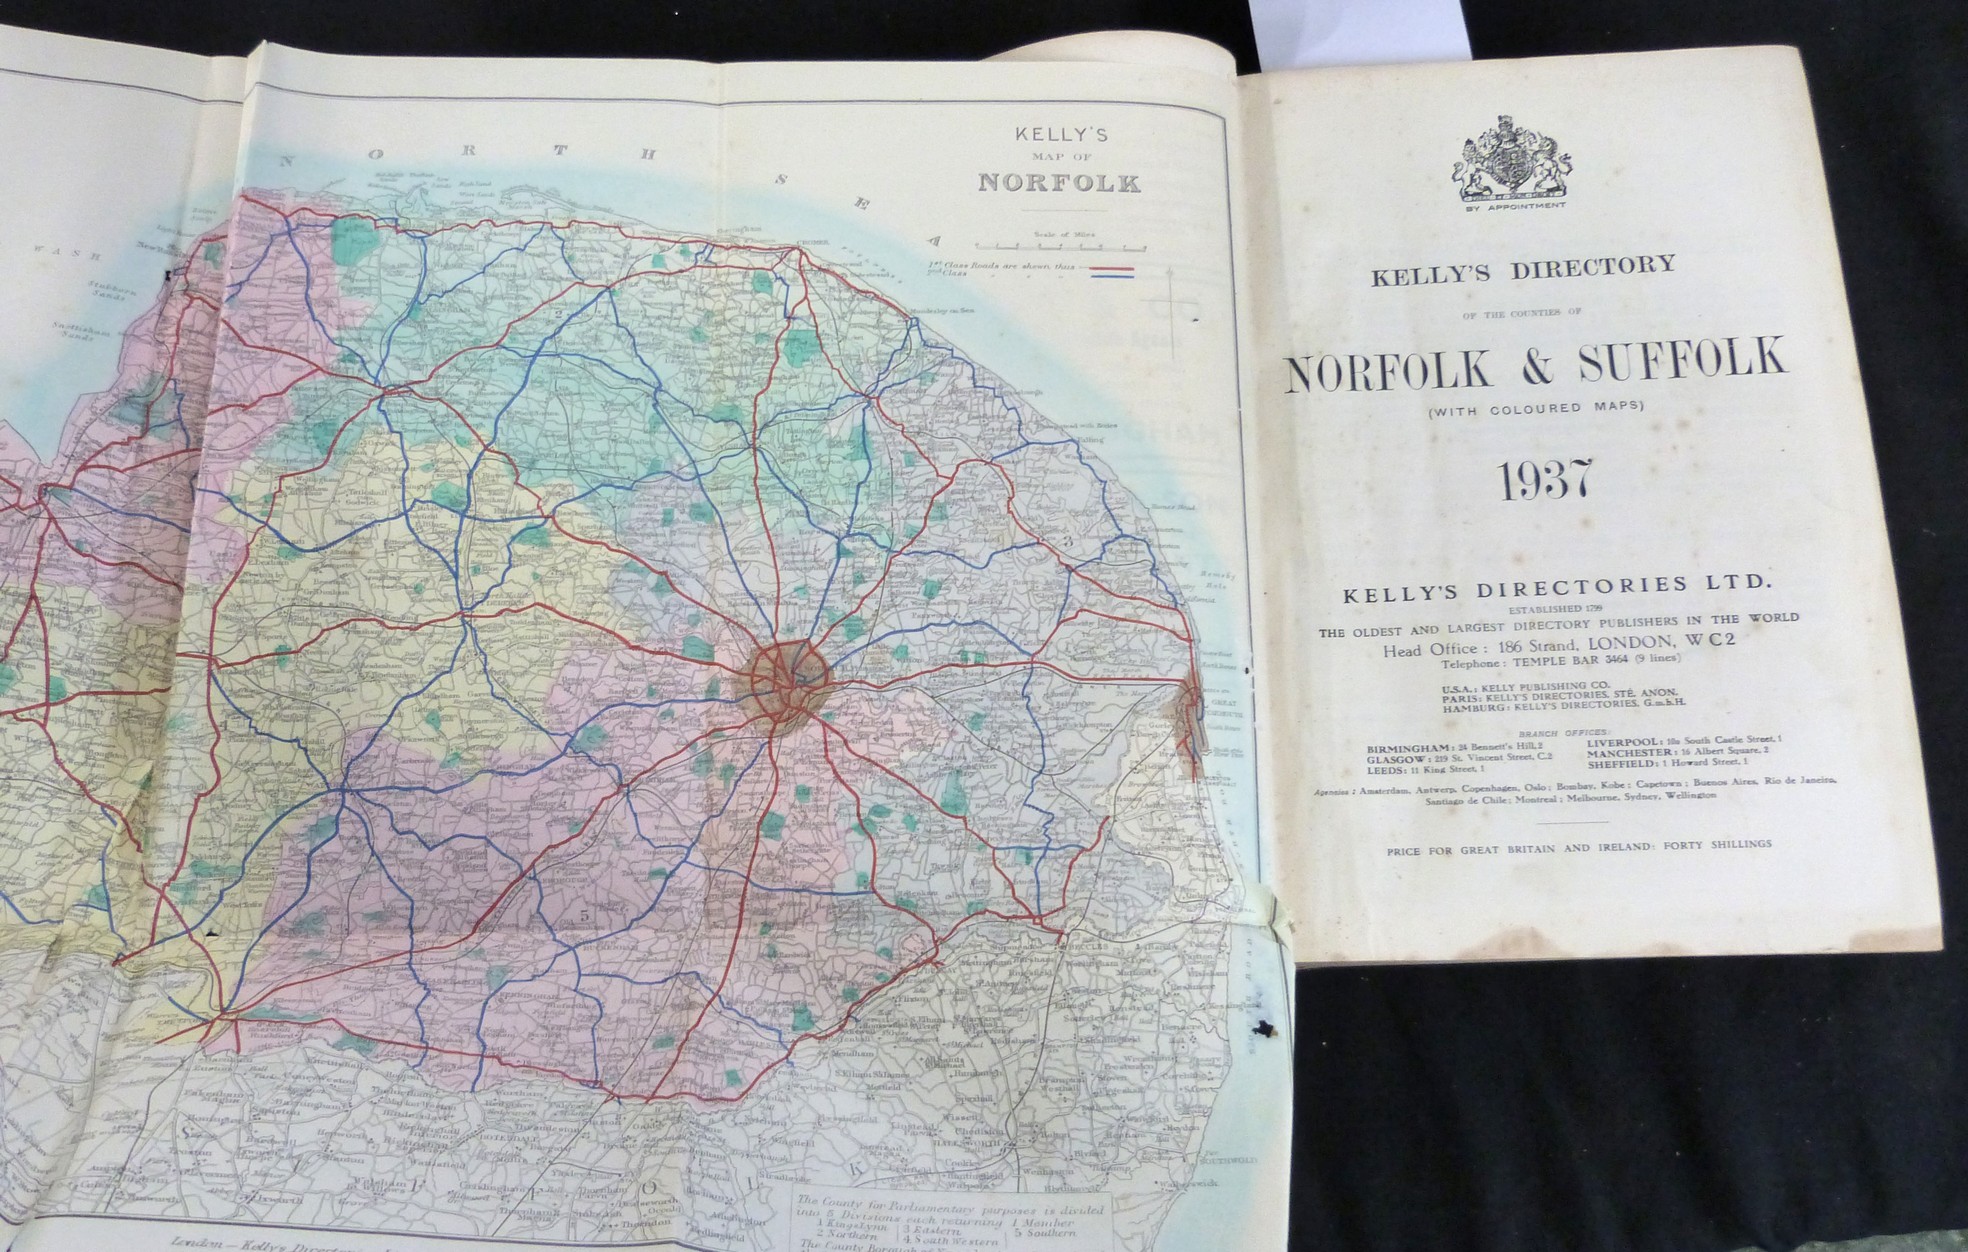 KELLY'S DIRECTORY OF NORFOLK AND SUFFOLK 1937, with map, original cloth gilt worn - Image 2 of 3